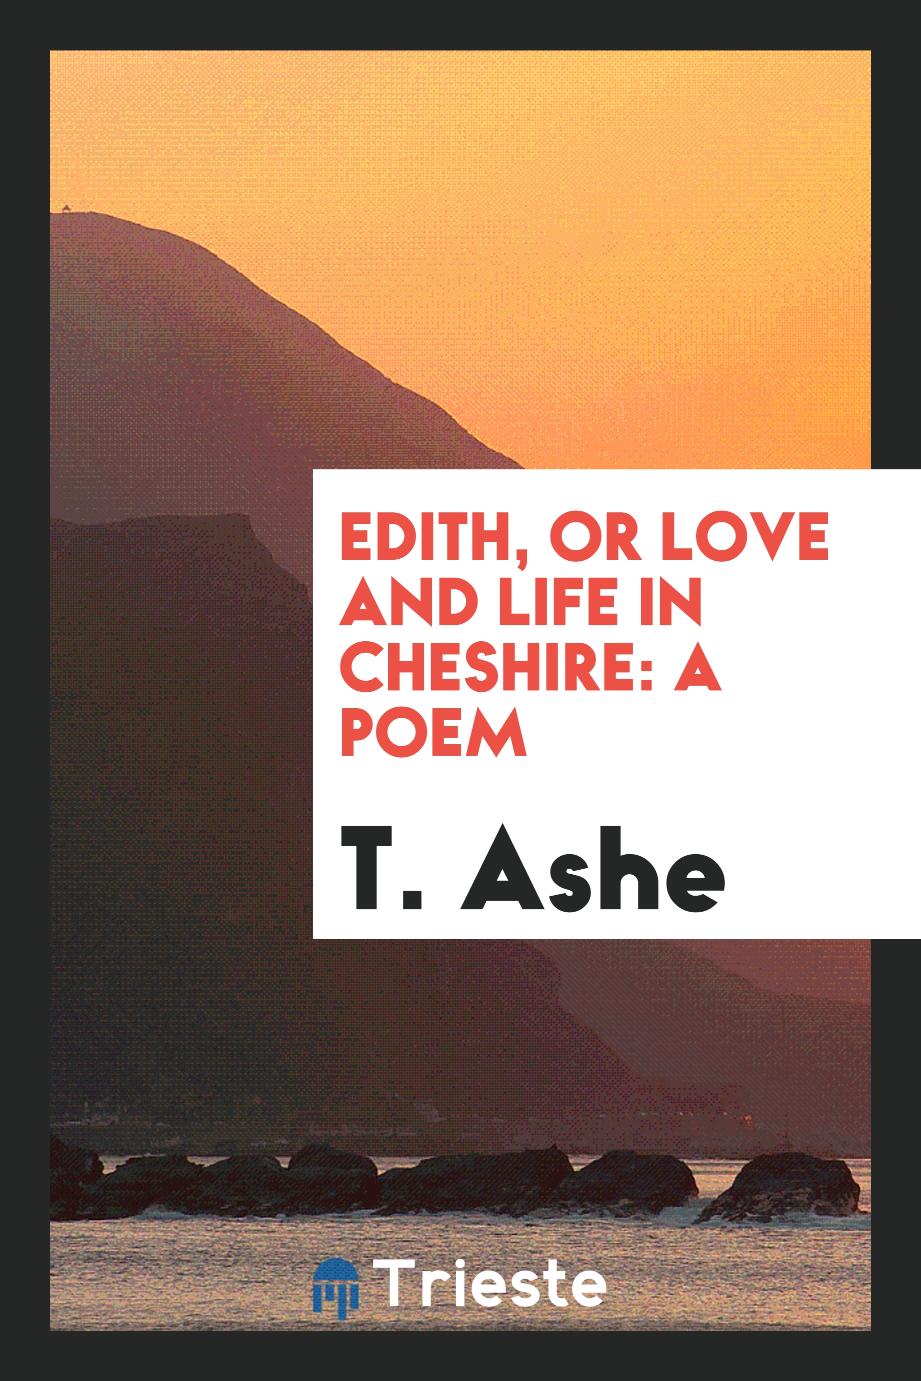 Edith, Or Love and Life in Cheshire: A Poem